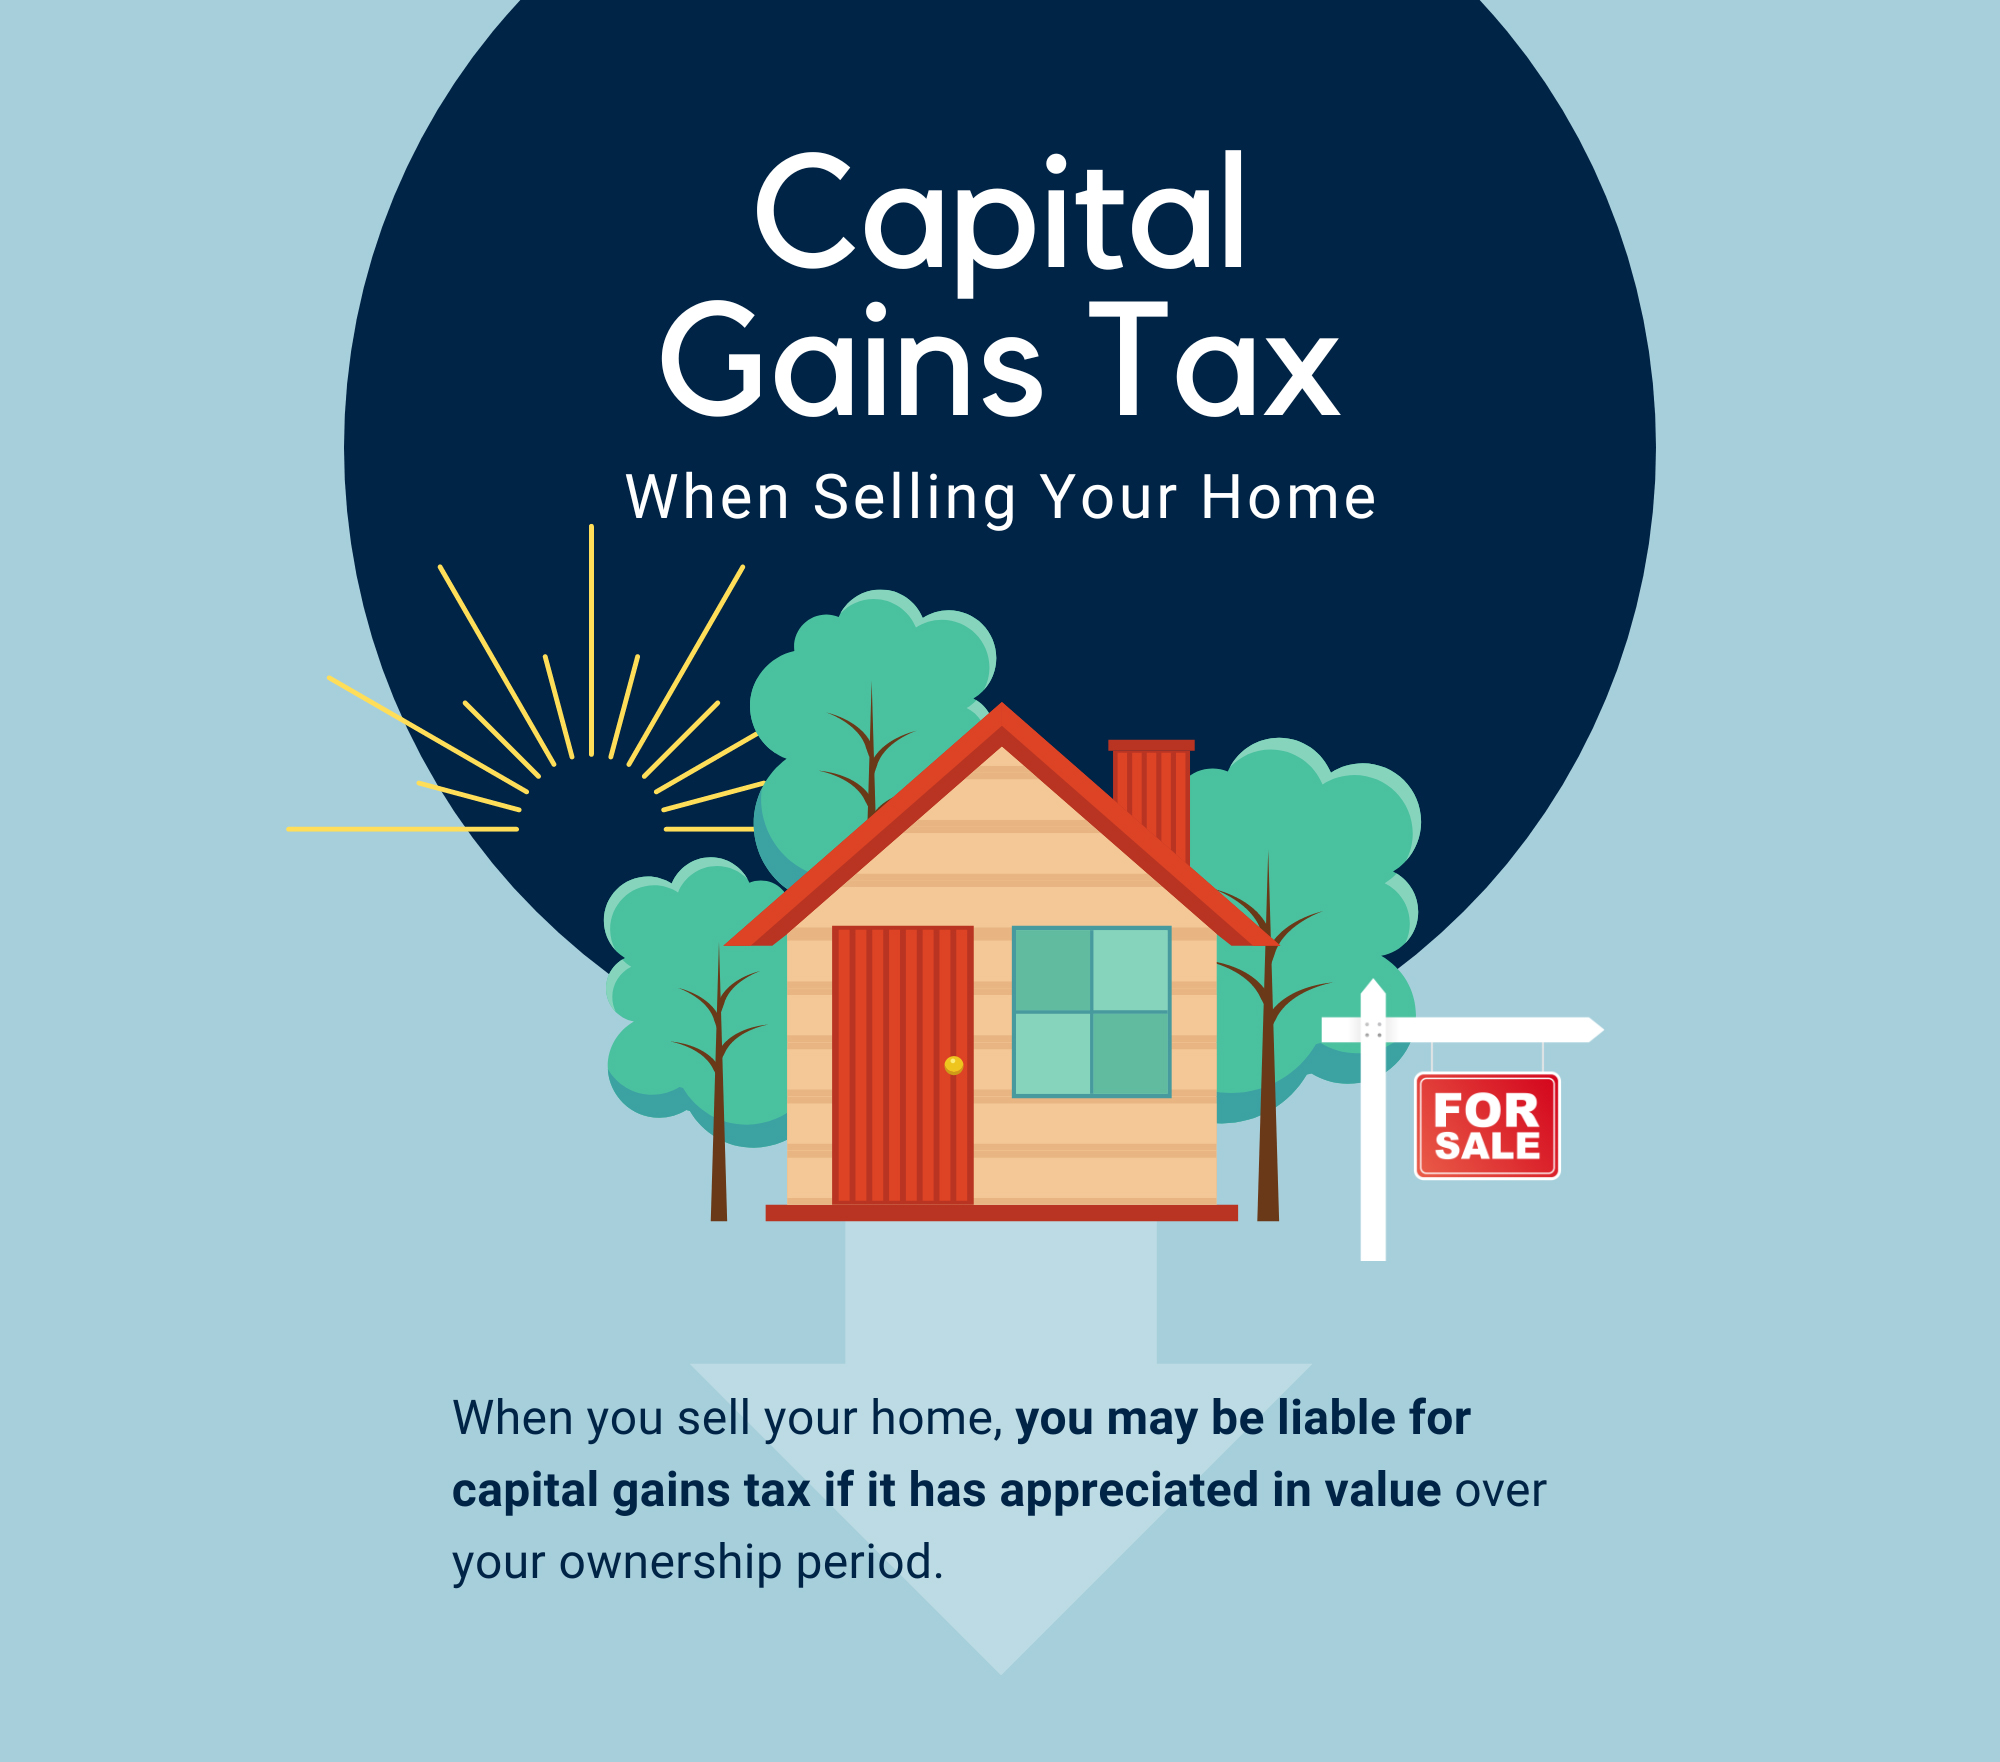 In the center there is a small house with a red roof surrounded by trees with the sun peeking over the horizon. Behind it is a dark blue circle with the words “Capital Gains Tax: When Selling Your Home.” The background is light blue with an arrow pointing down under the house. In the foreground of the house, there is a “For Sale” sign out front. Below the house there is text that reads: When you sell your home, you may be liable for capital gains tax if it has appreciated in value over your ownership period.